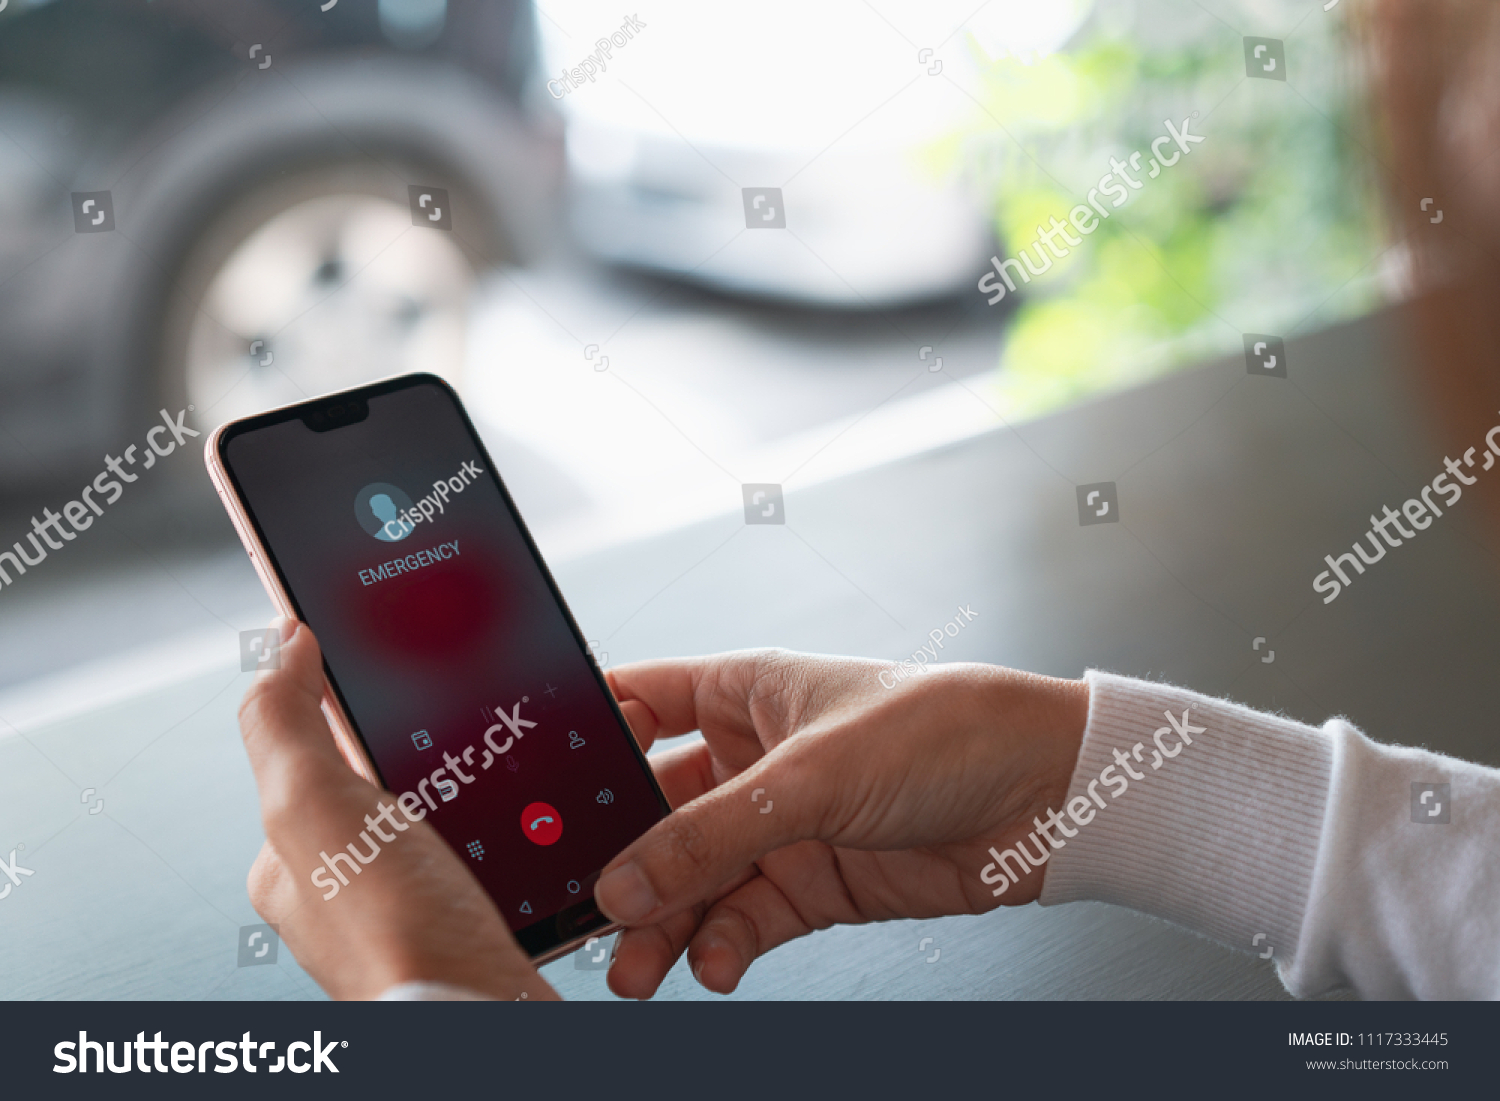 Emergency call use by smartphone, Women using a digital generated phone with emergency call on the screen. All screen graphics are made up, Emergency concept #1117333445